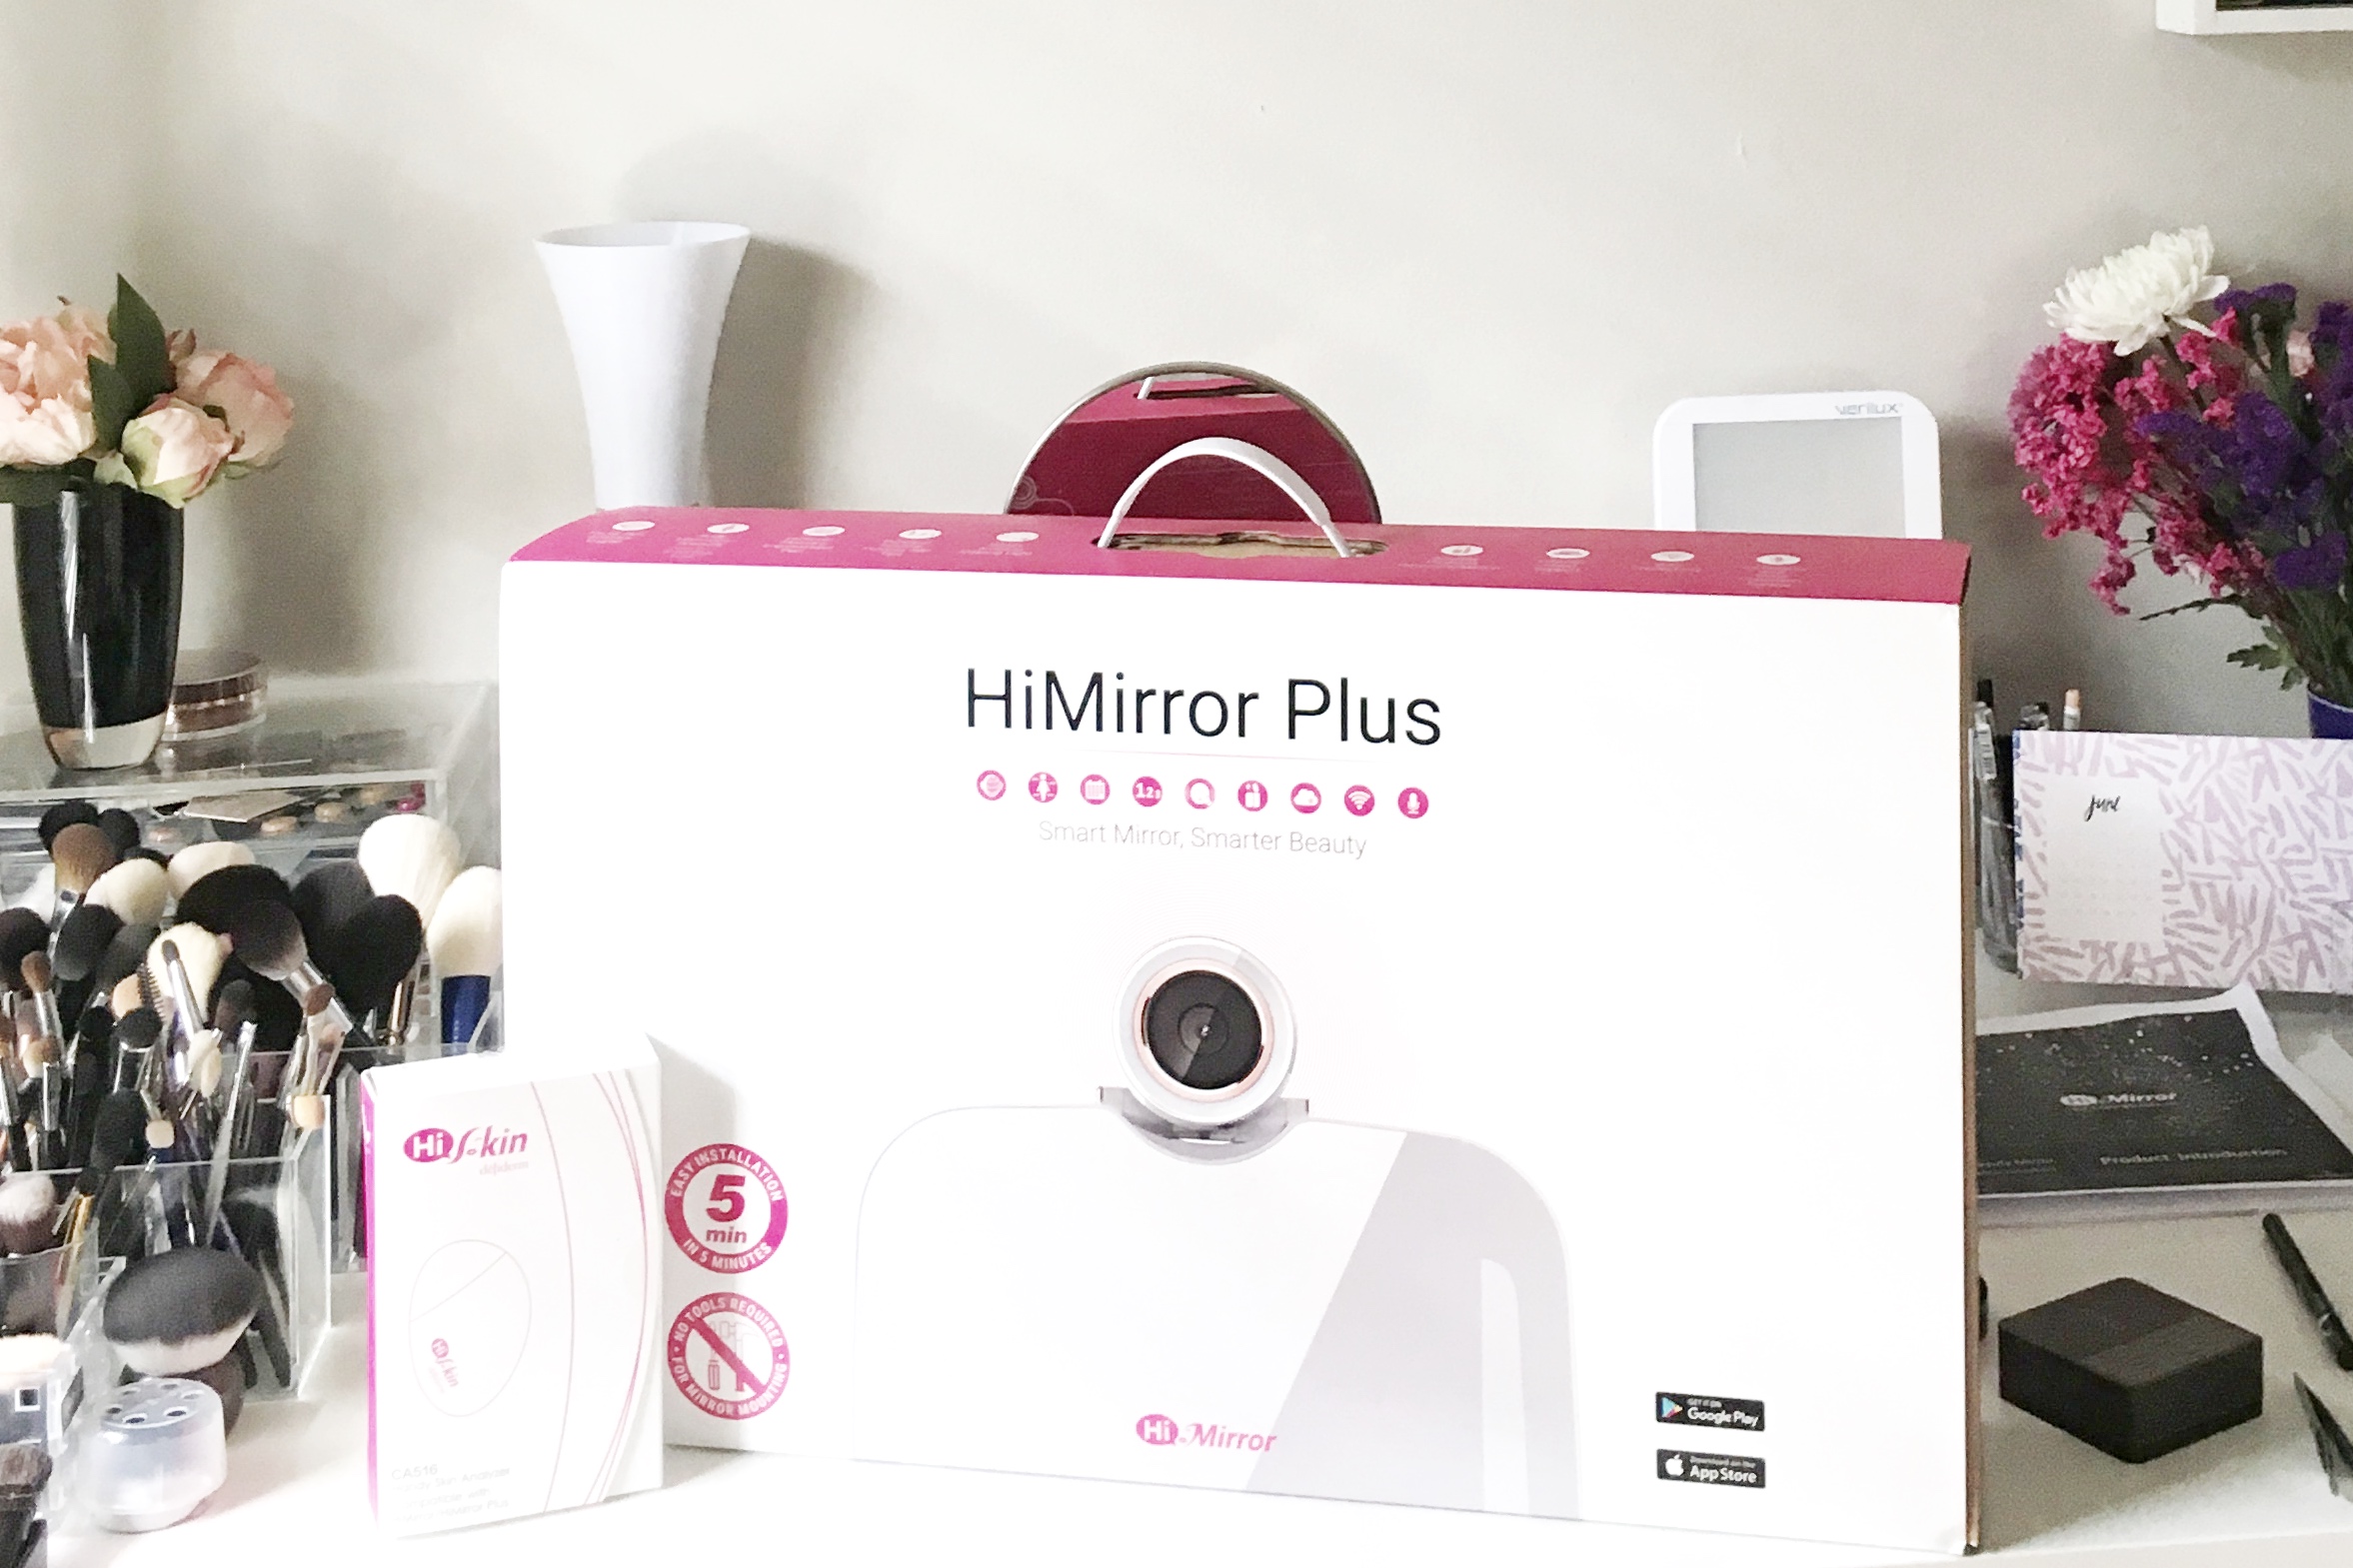 HiMirror Plus at-home beauty consultant